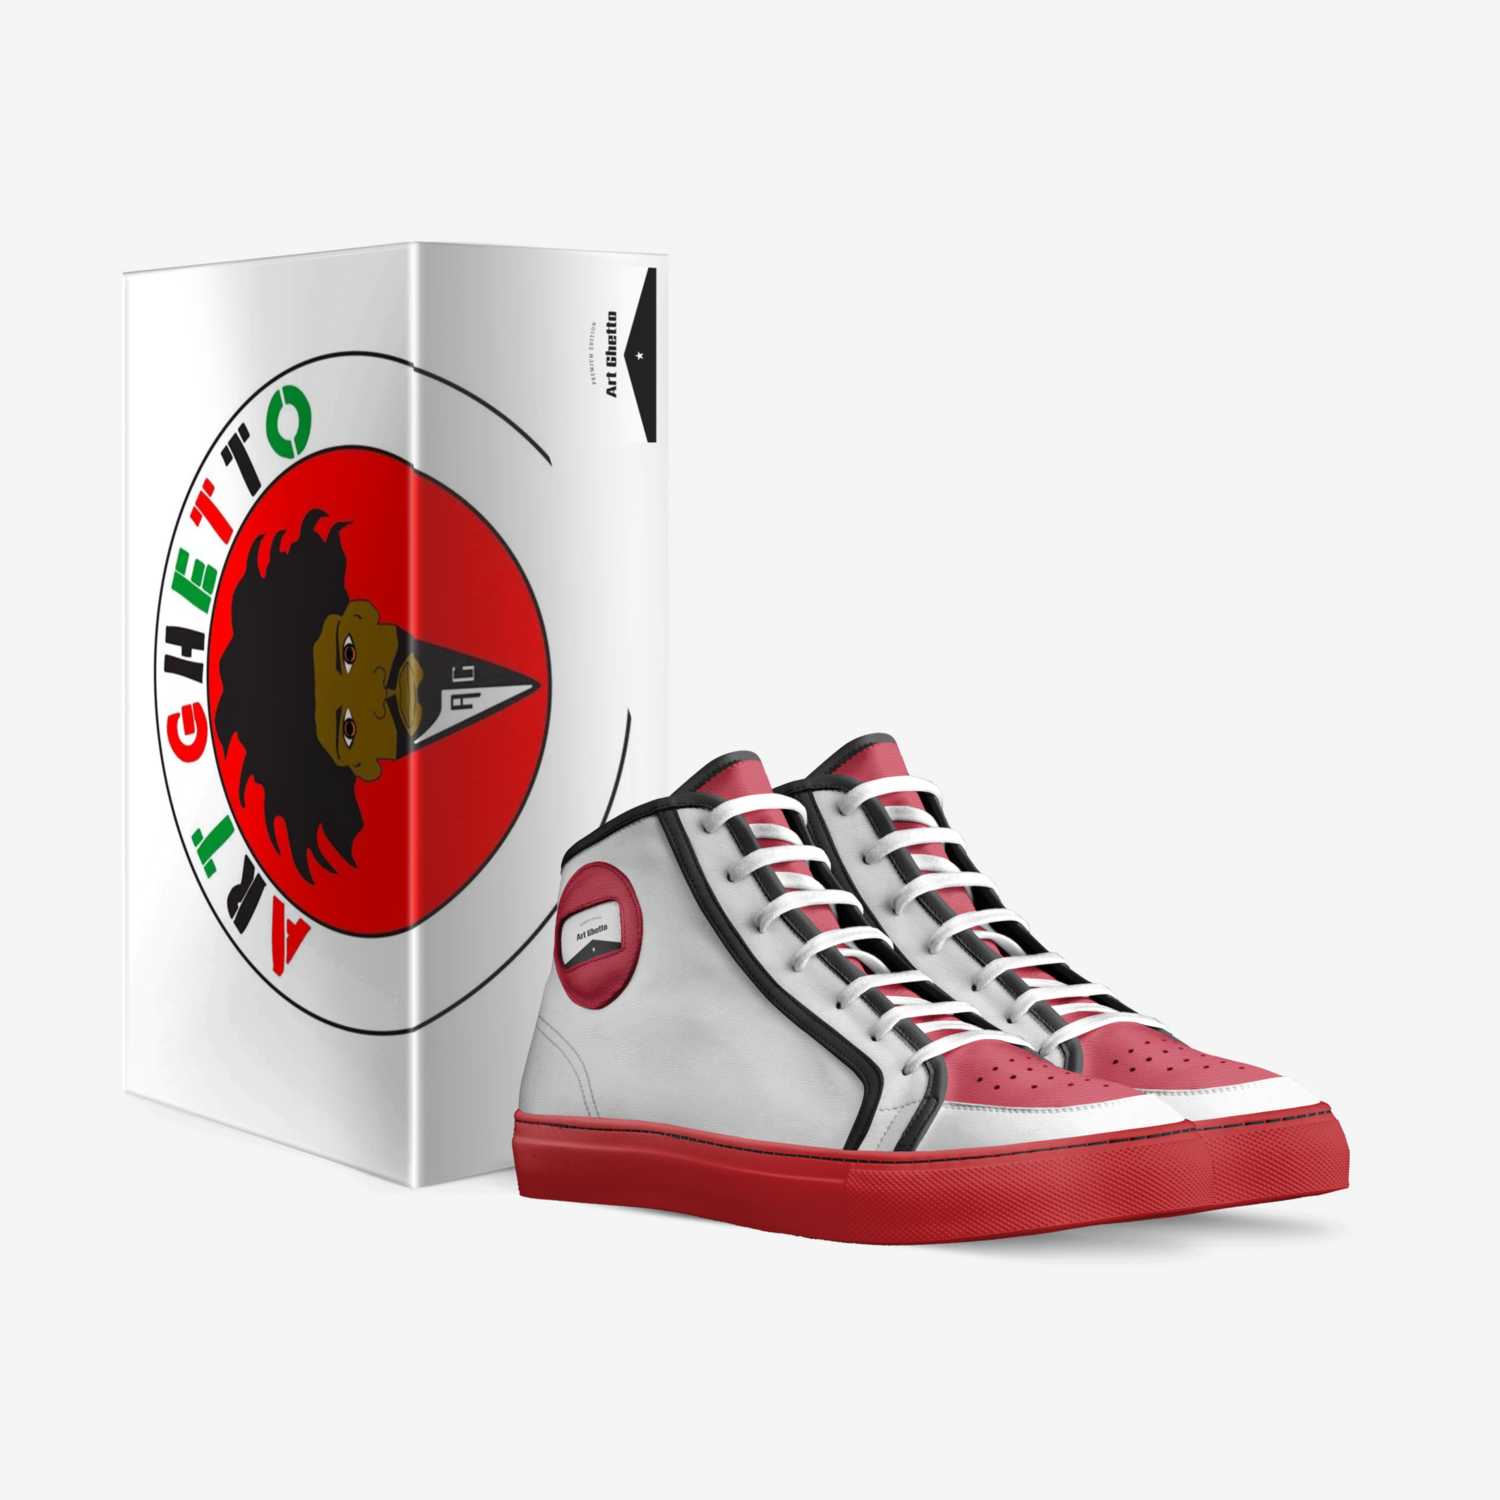 Art Ghetto custom made in Italy shoes by Christopher Buchanan El | Box view